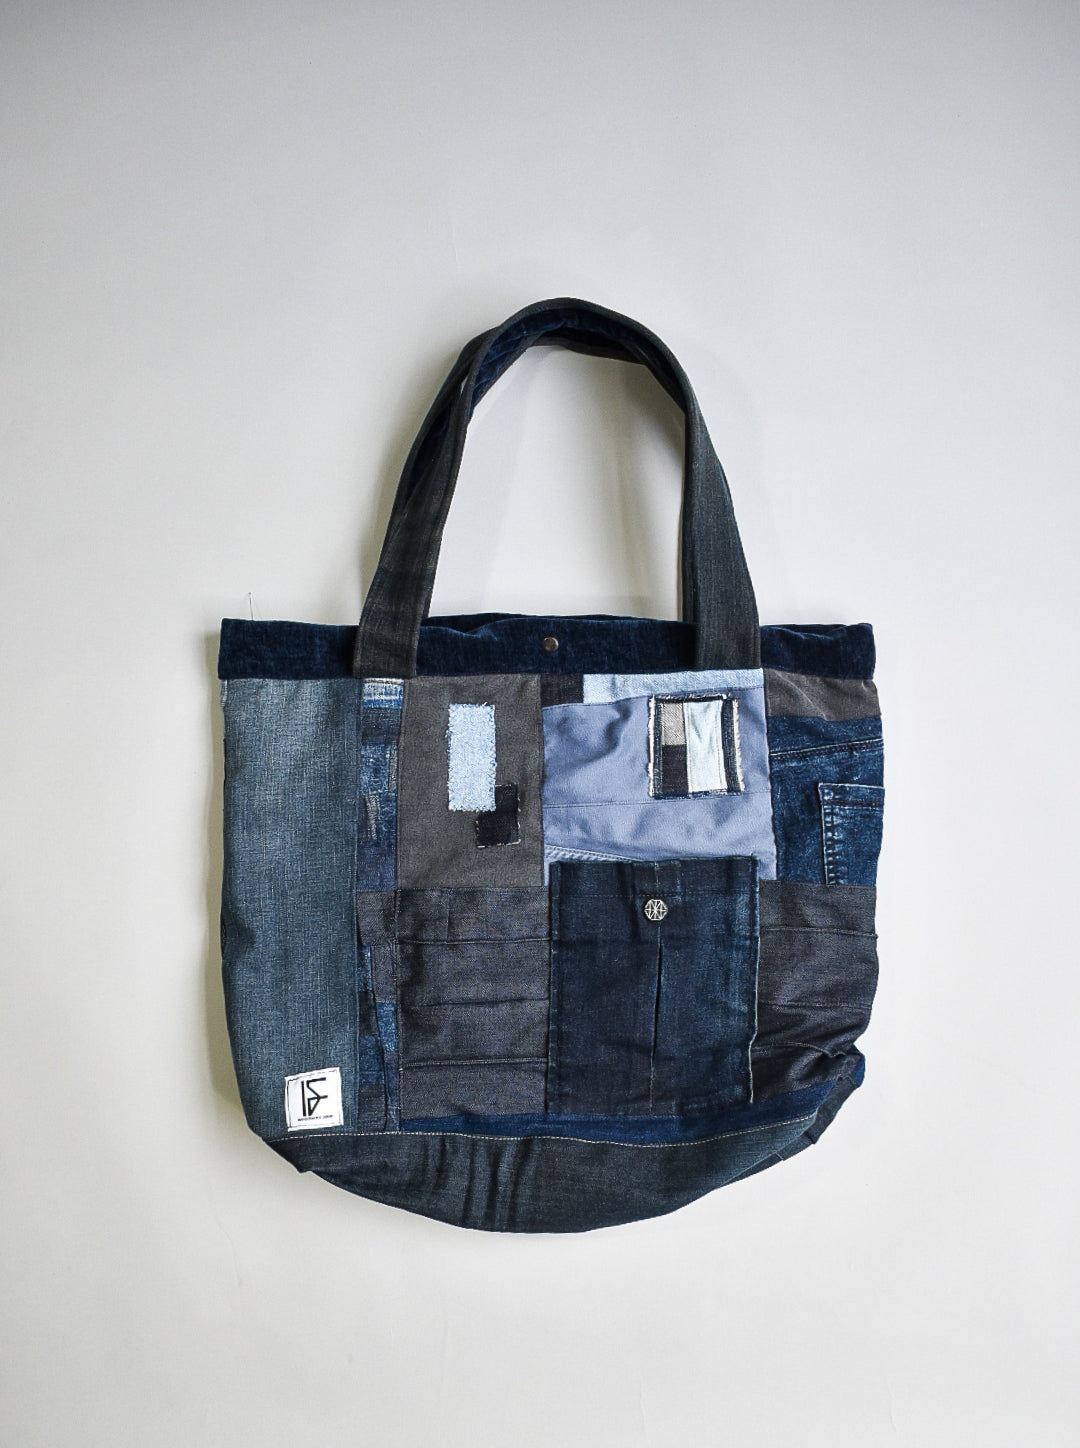 IF DENIM | Sustainable Handcrafted Totebag Patchwork Leftovers